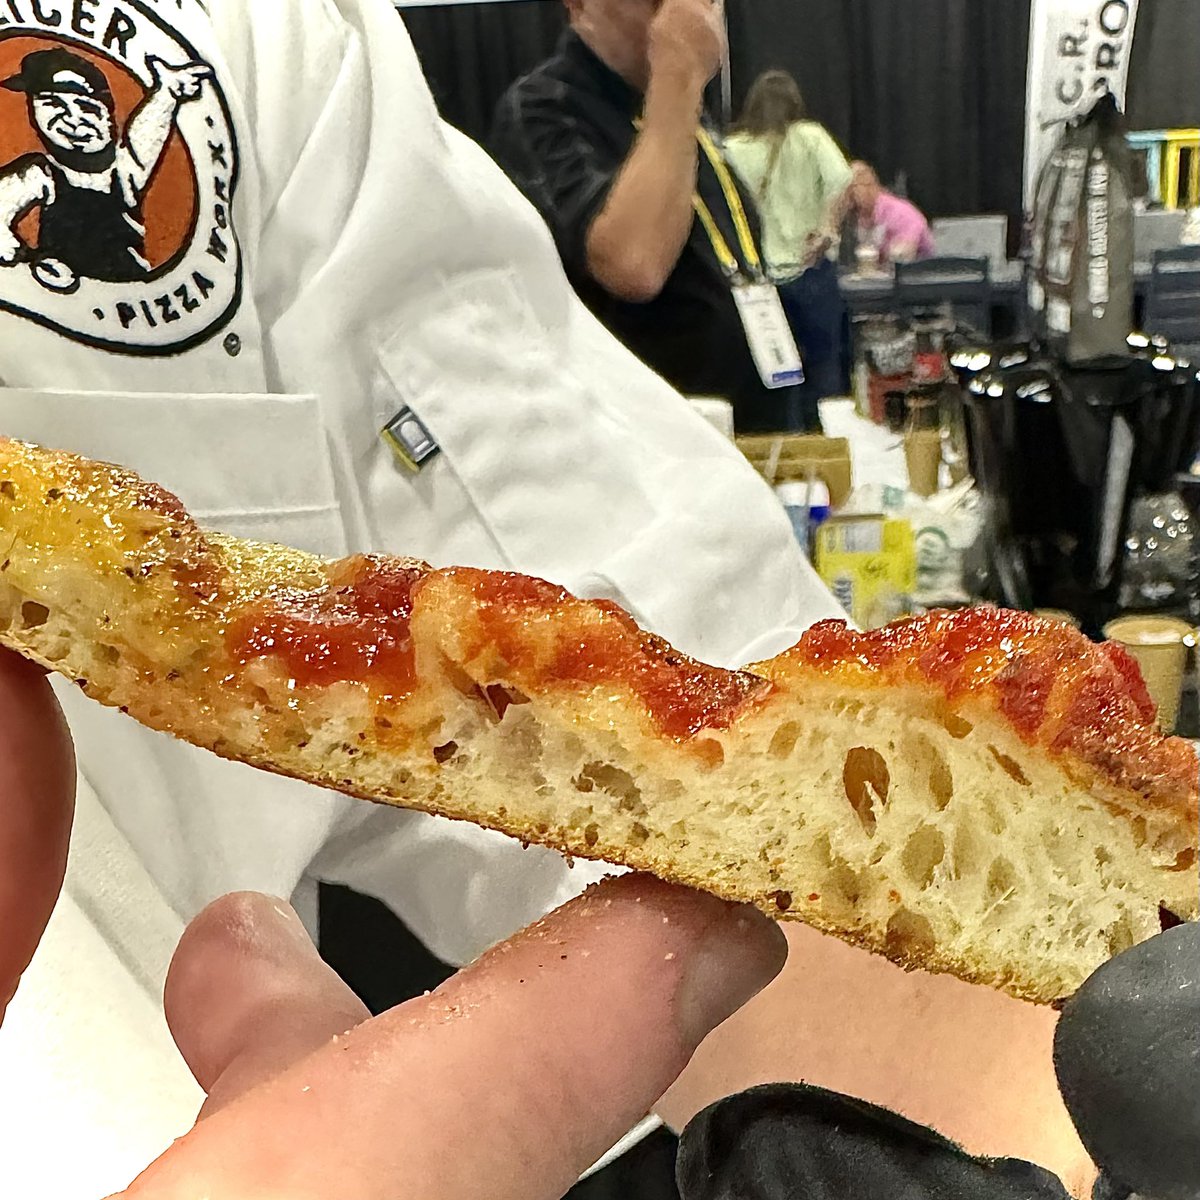 Just add water and mix, simple as that.

🍕 Any home oven
🍕 Any pizza oven
🍕 Any grill, smoker or flattop

Urban Slicer has the best professional pizza dough mixes on planet earth. 

#urbanslicer #neapolitanpizza #diypizza